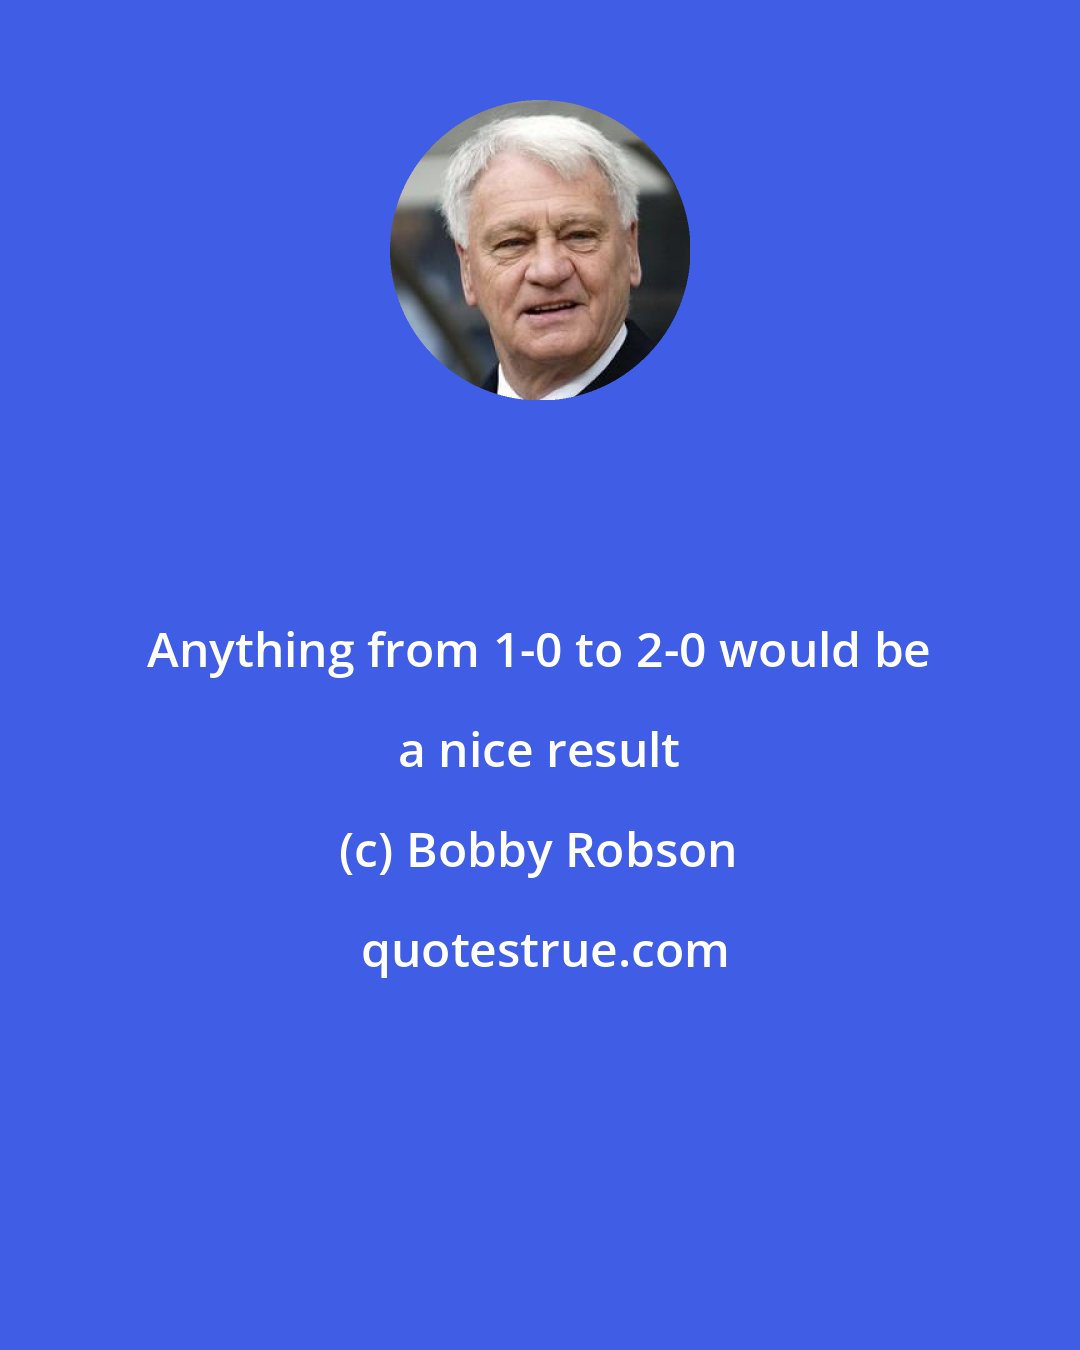 Bobby Robson: Anything from 1-0 to 2-0 would be a nice result